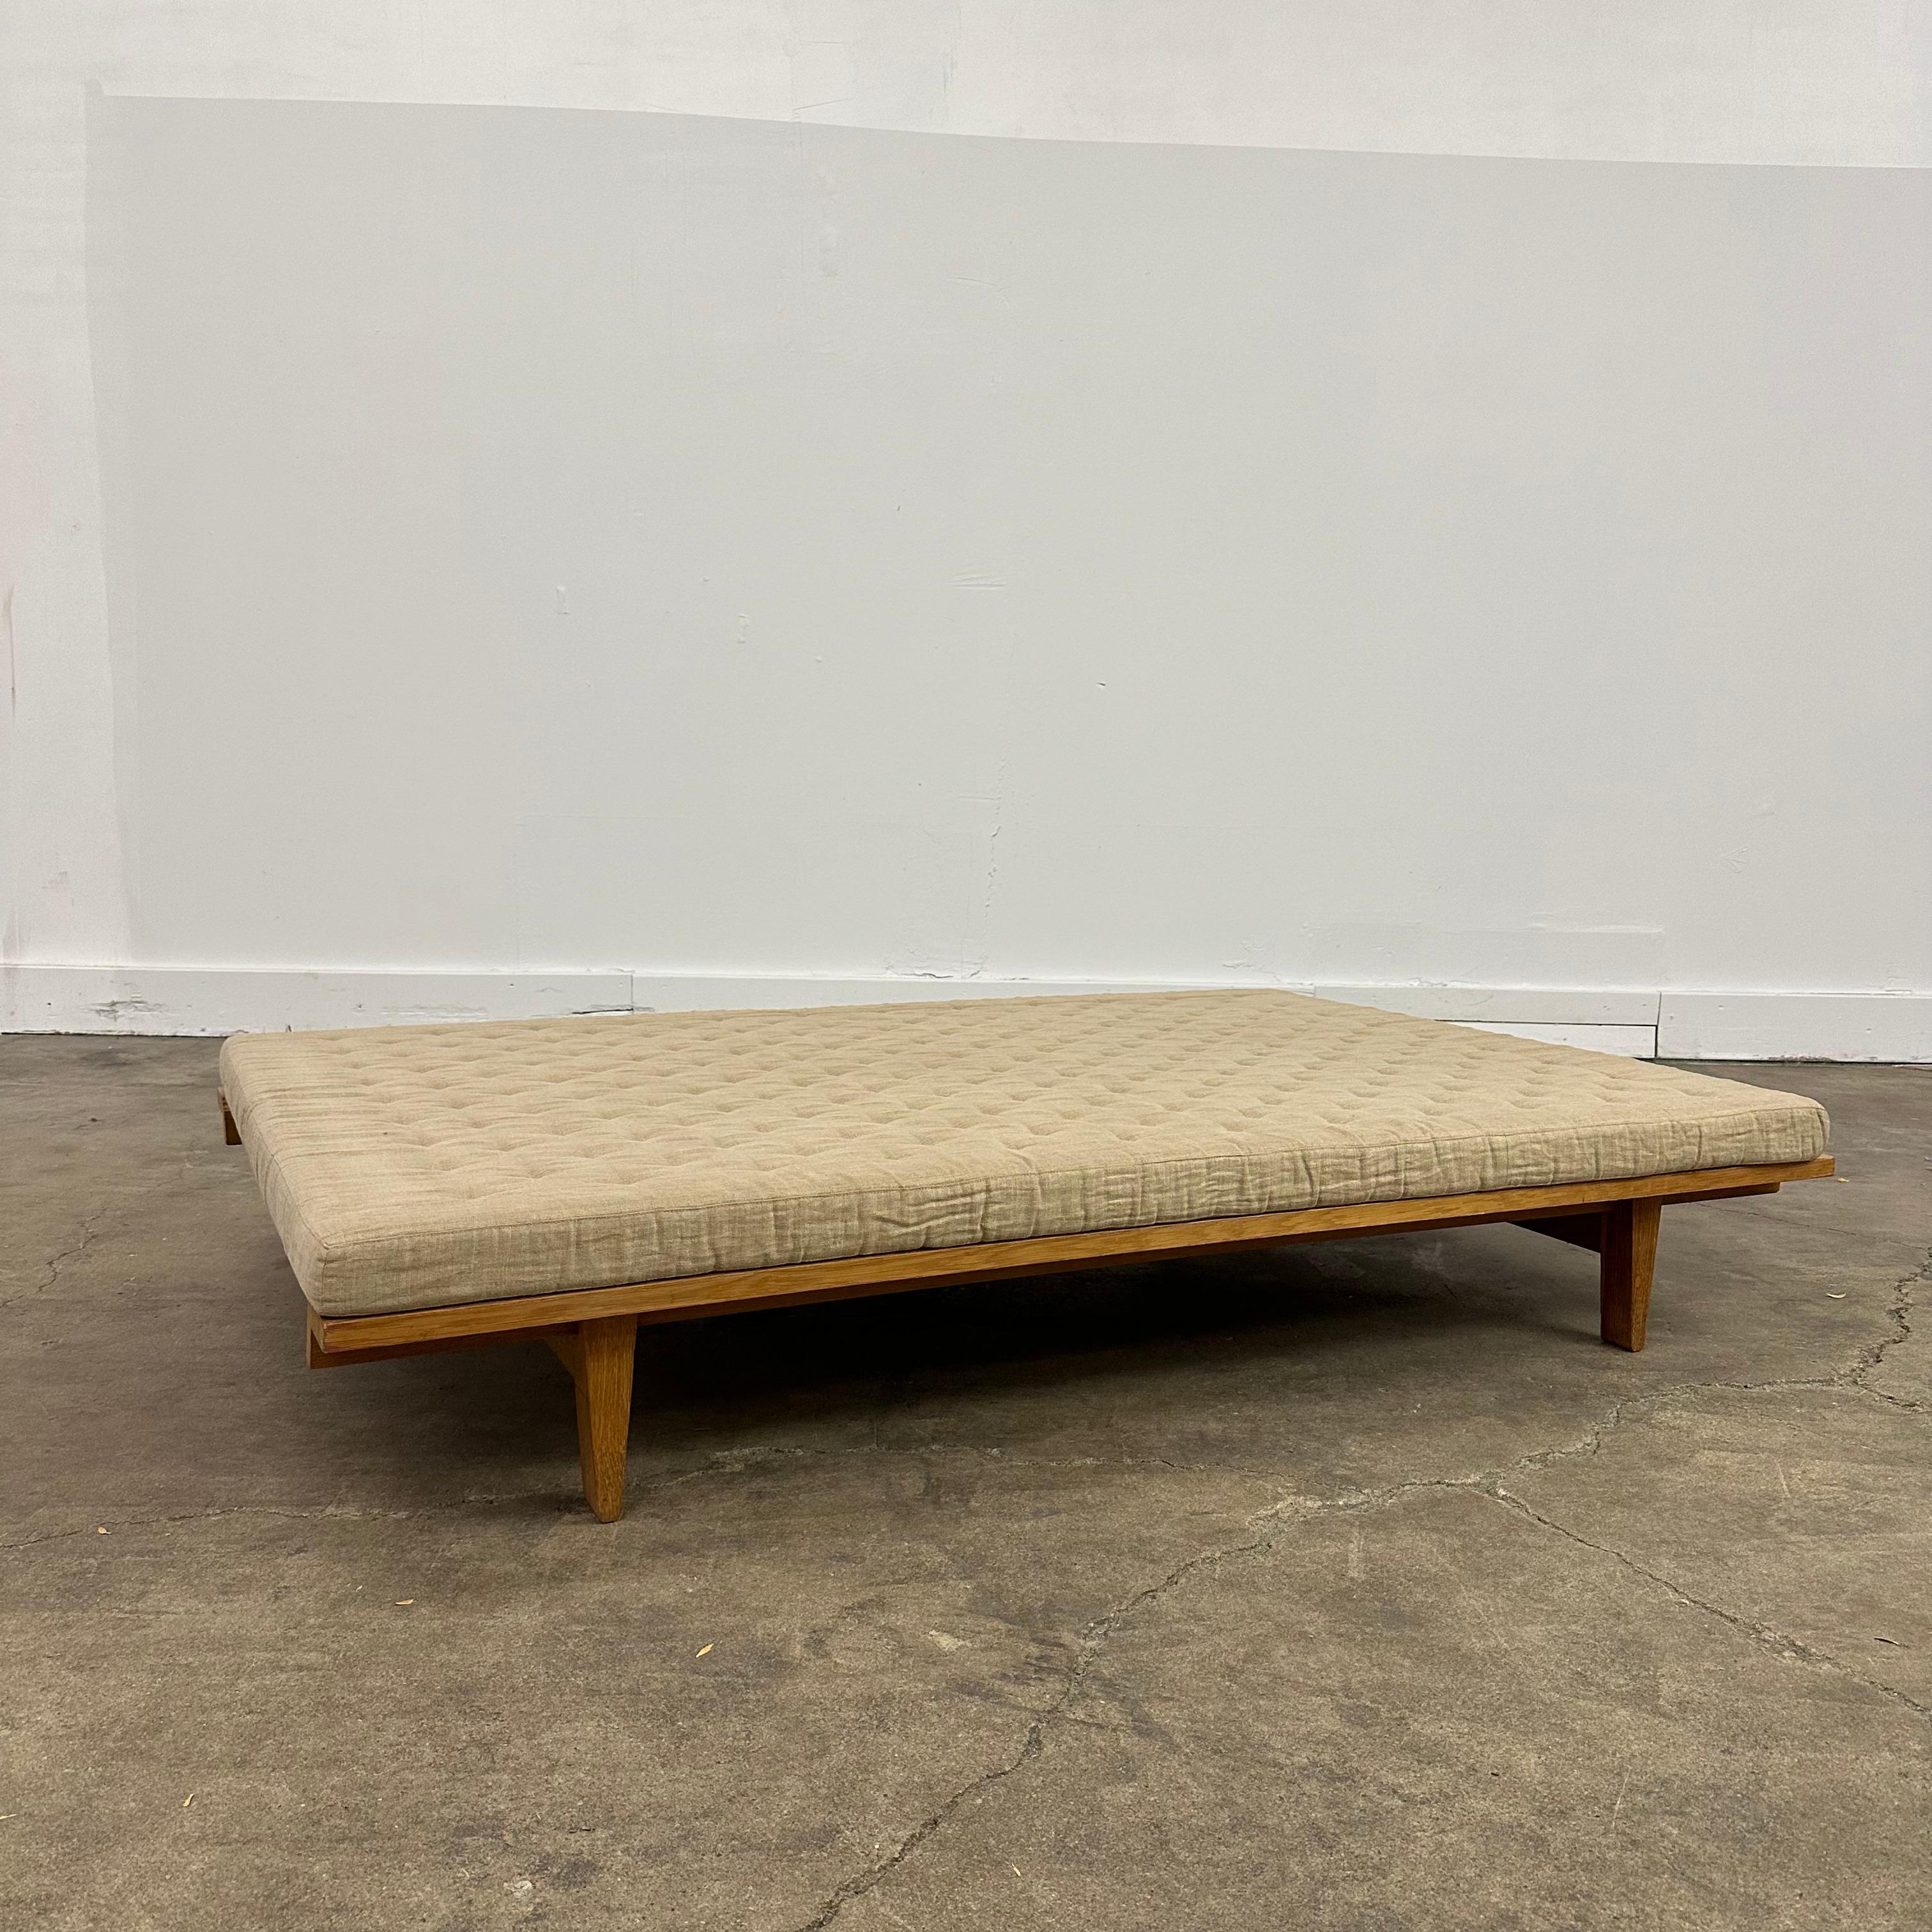 Prototype Daybed by Preben Juhl Fabricius and Jorgen Kastholm for Poul Bachmann. Rectangular horizontal cross supports above wedge feet, with original natural cotton-covered textile mattress.